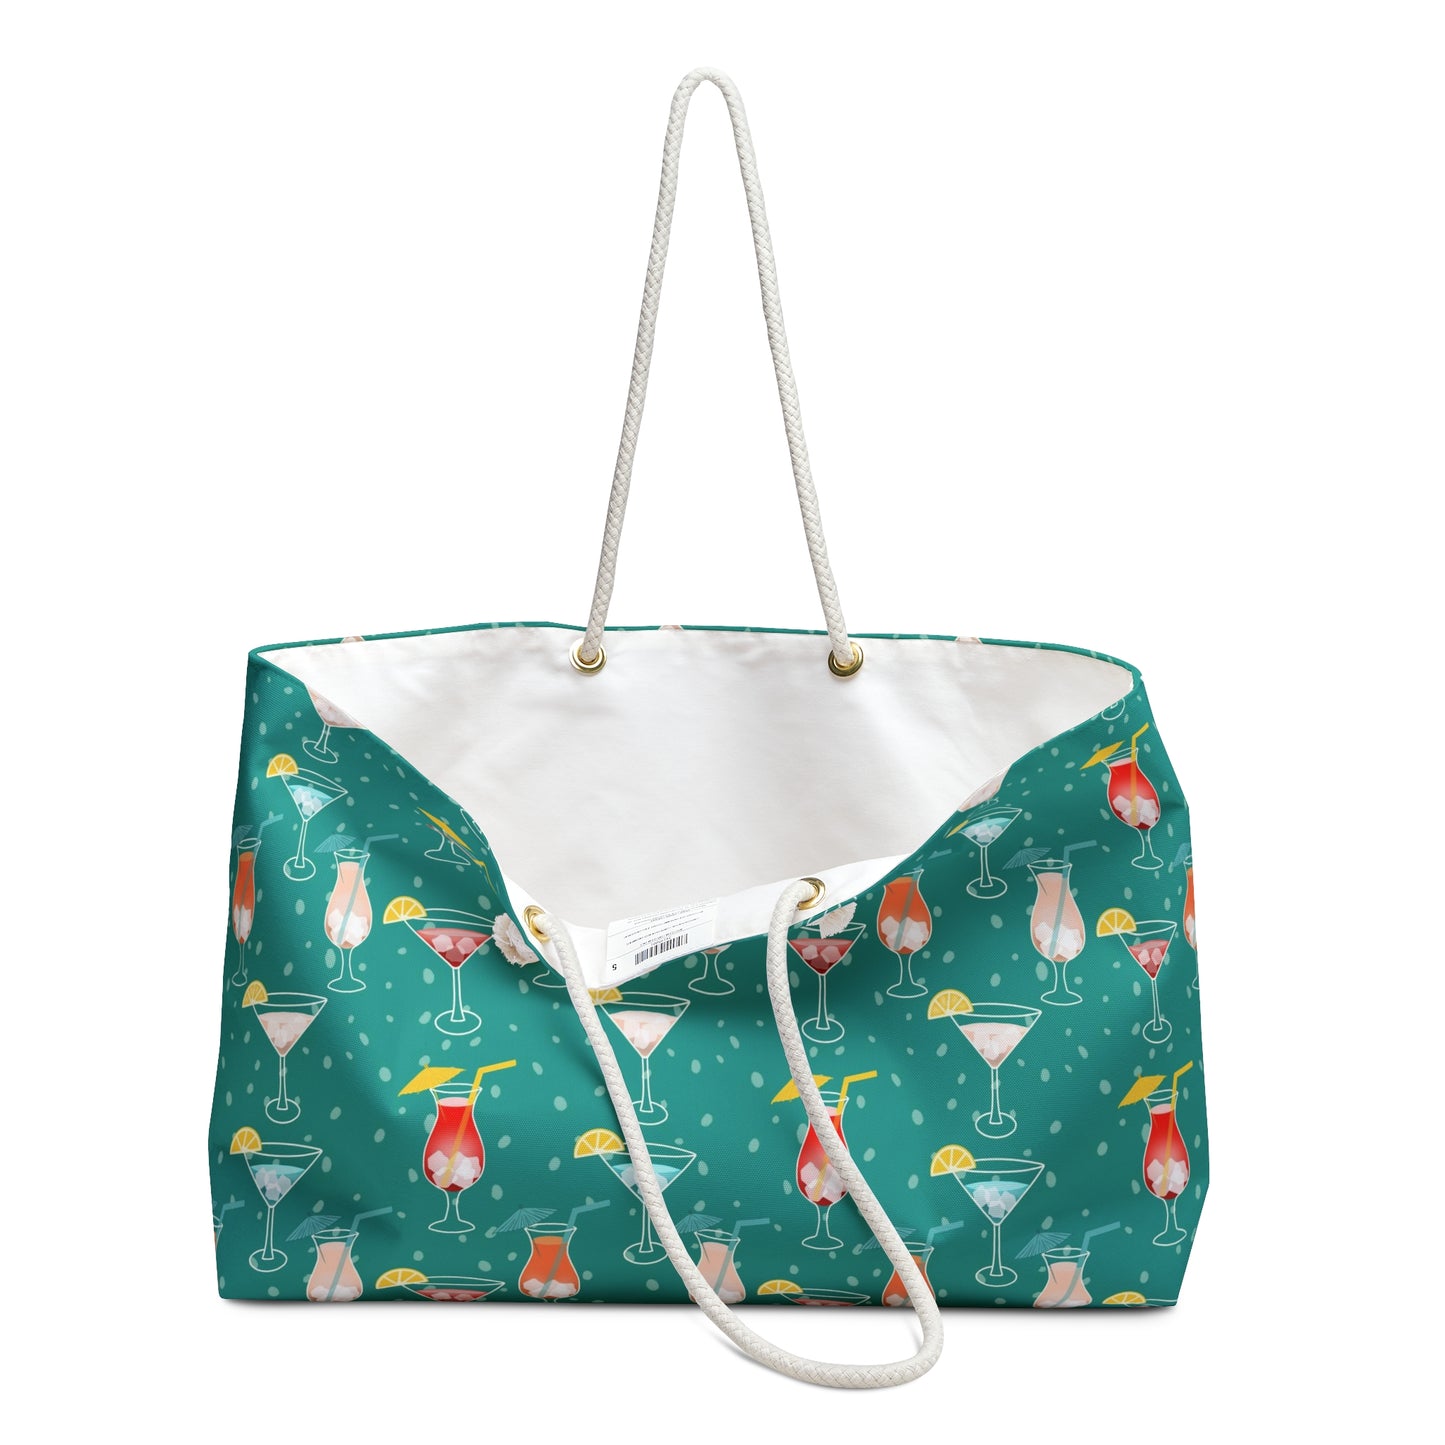 Cocktails Delight Weekender Tote Bag: Colorful, Garnished, and Stylish